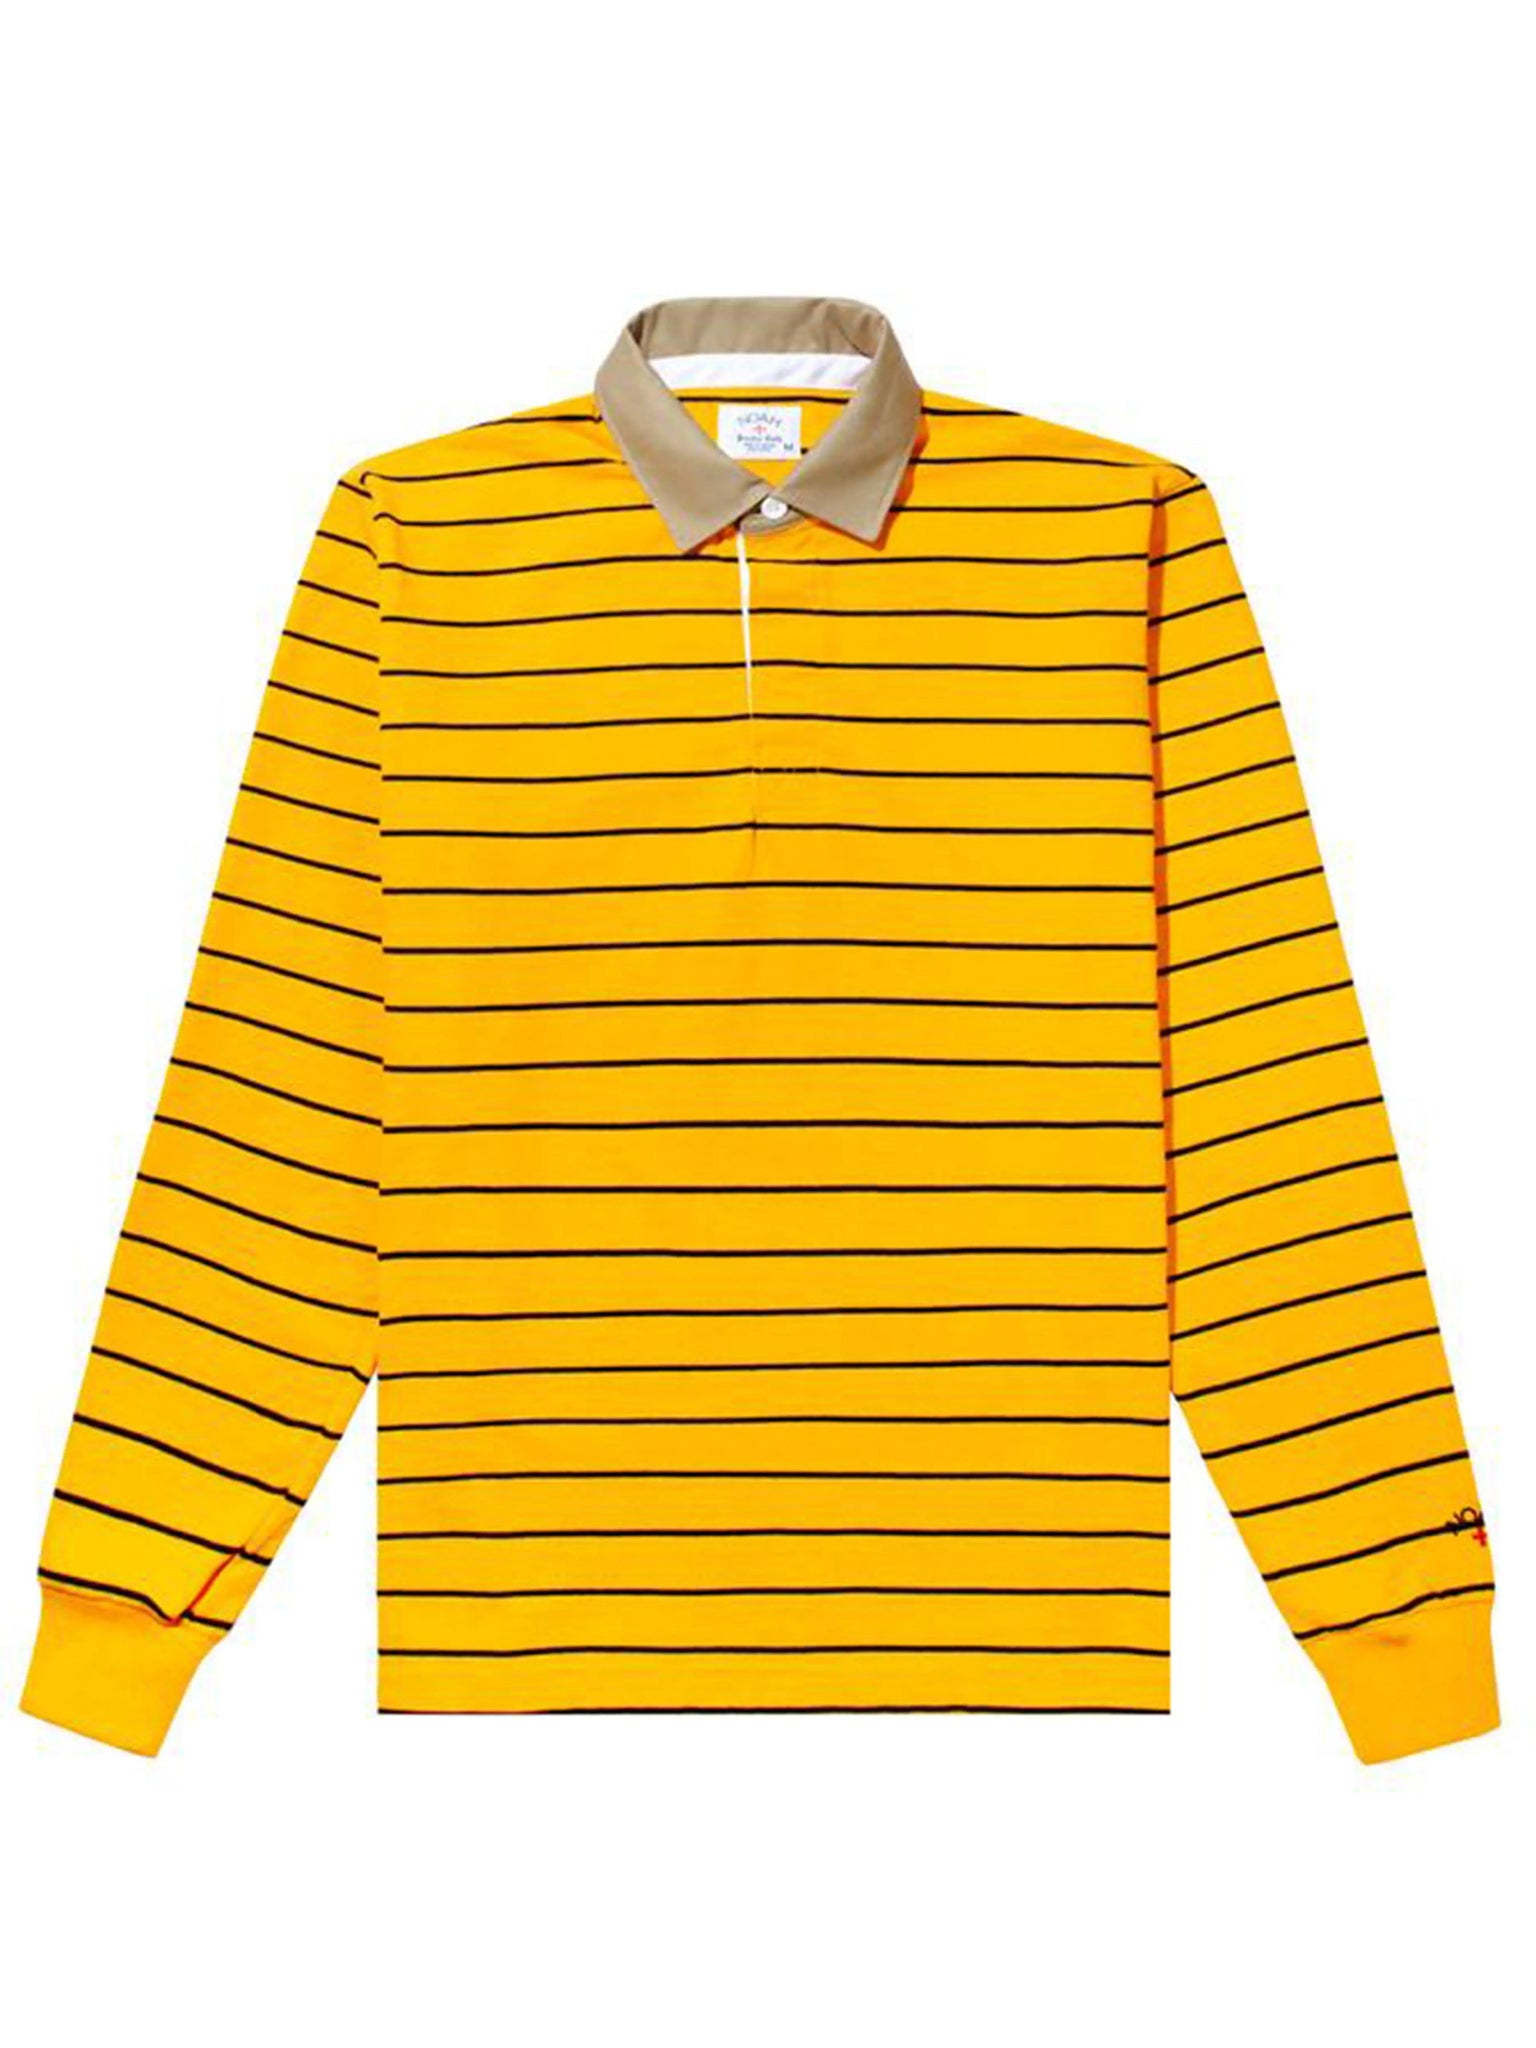 Noah Classic Rugby Yellow Prior